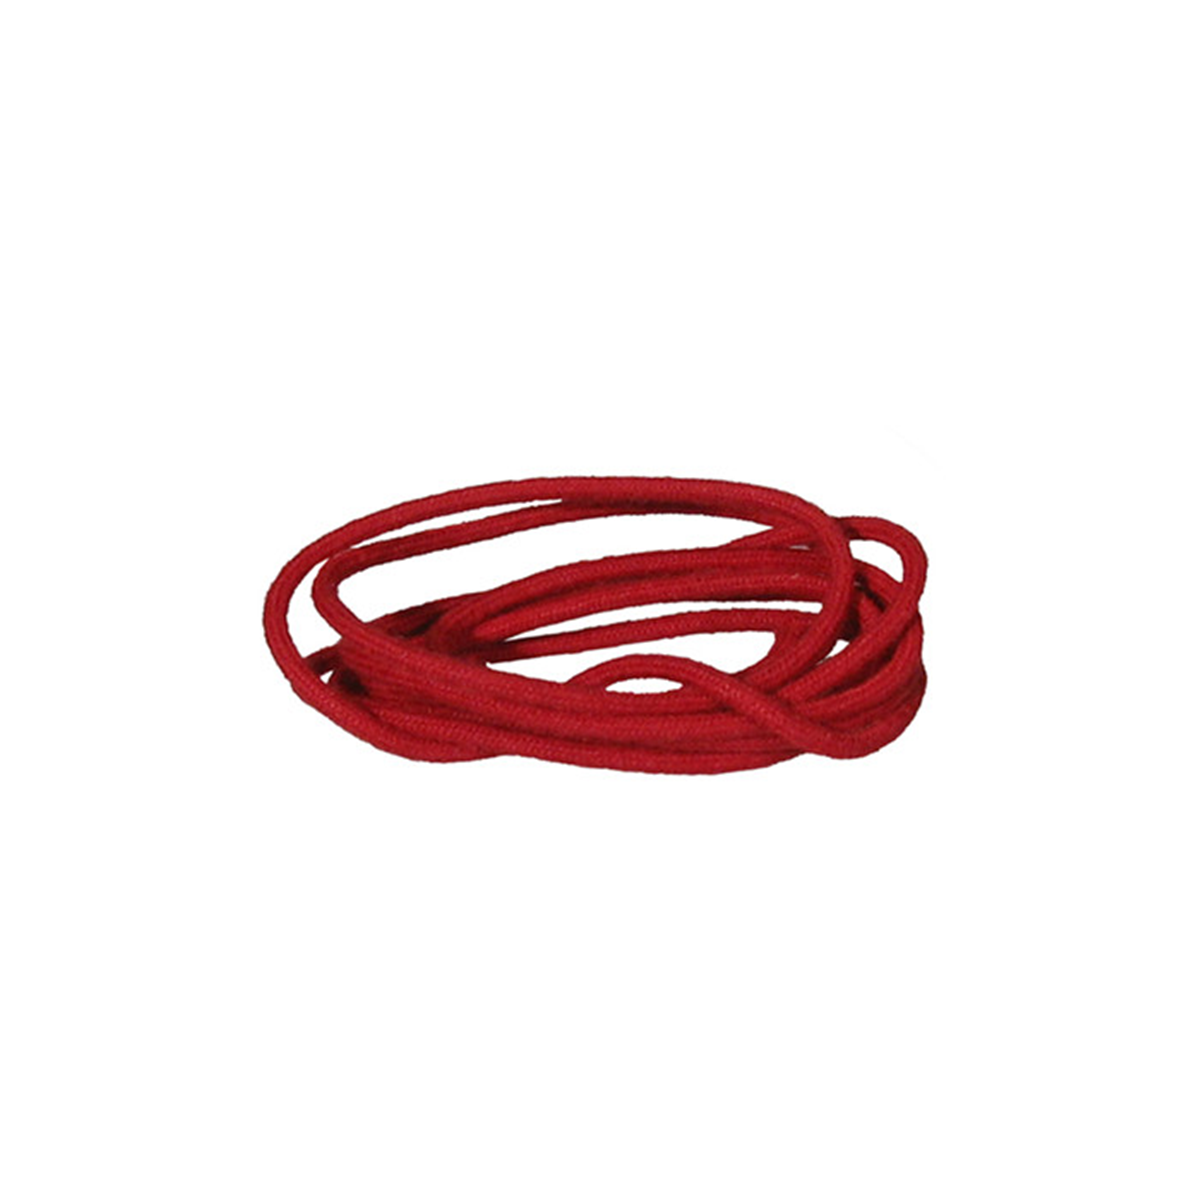 BOSTON VCC-181-RD cloth covered wire - 1m